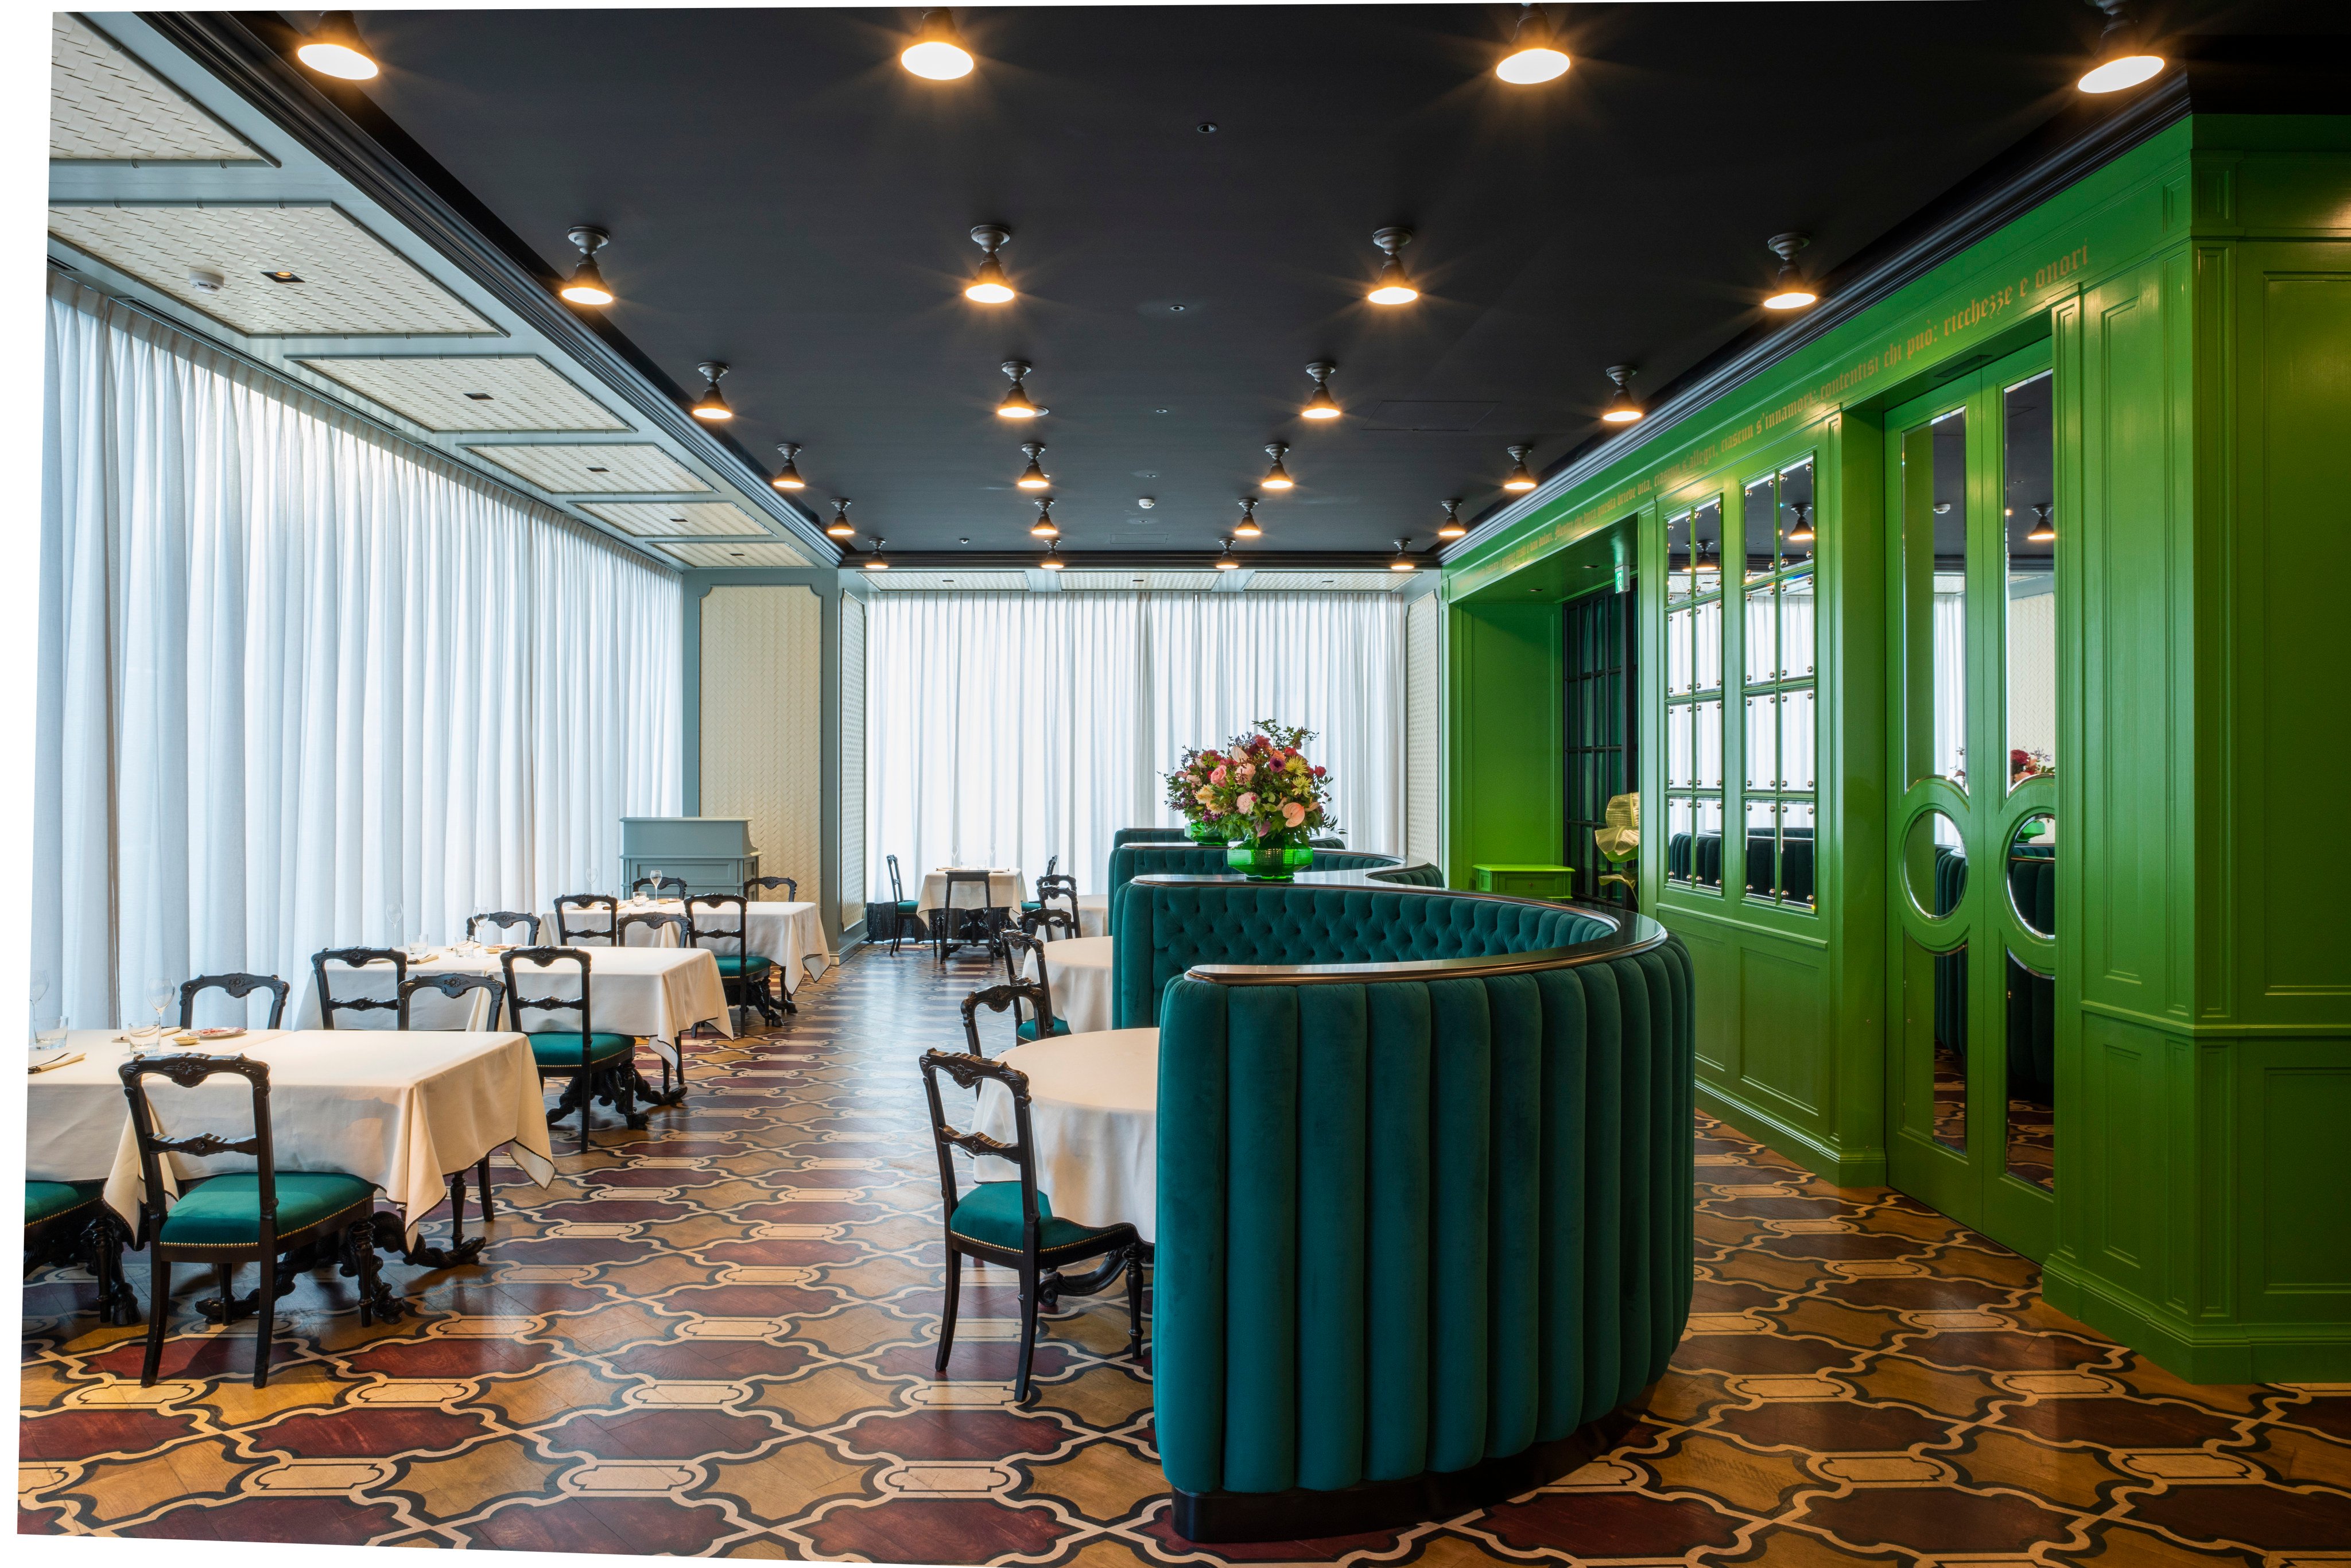 Gucci Osteria in Tokyo pops with colour and Alice in Wonderland-style whimsy. Photo: Gucci